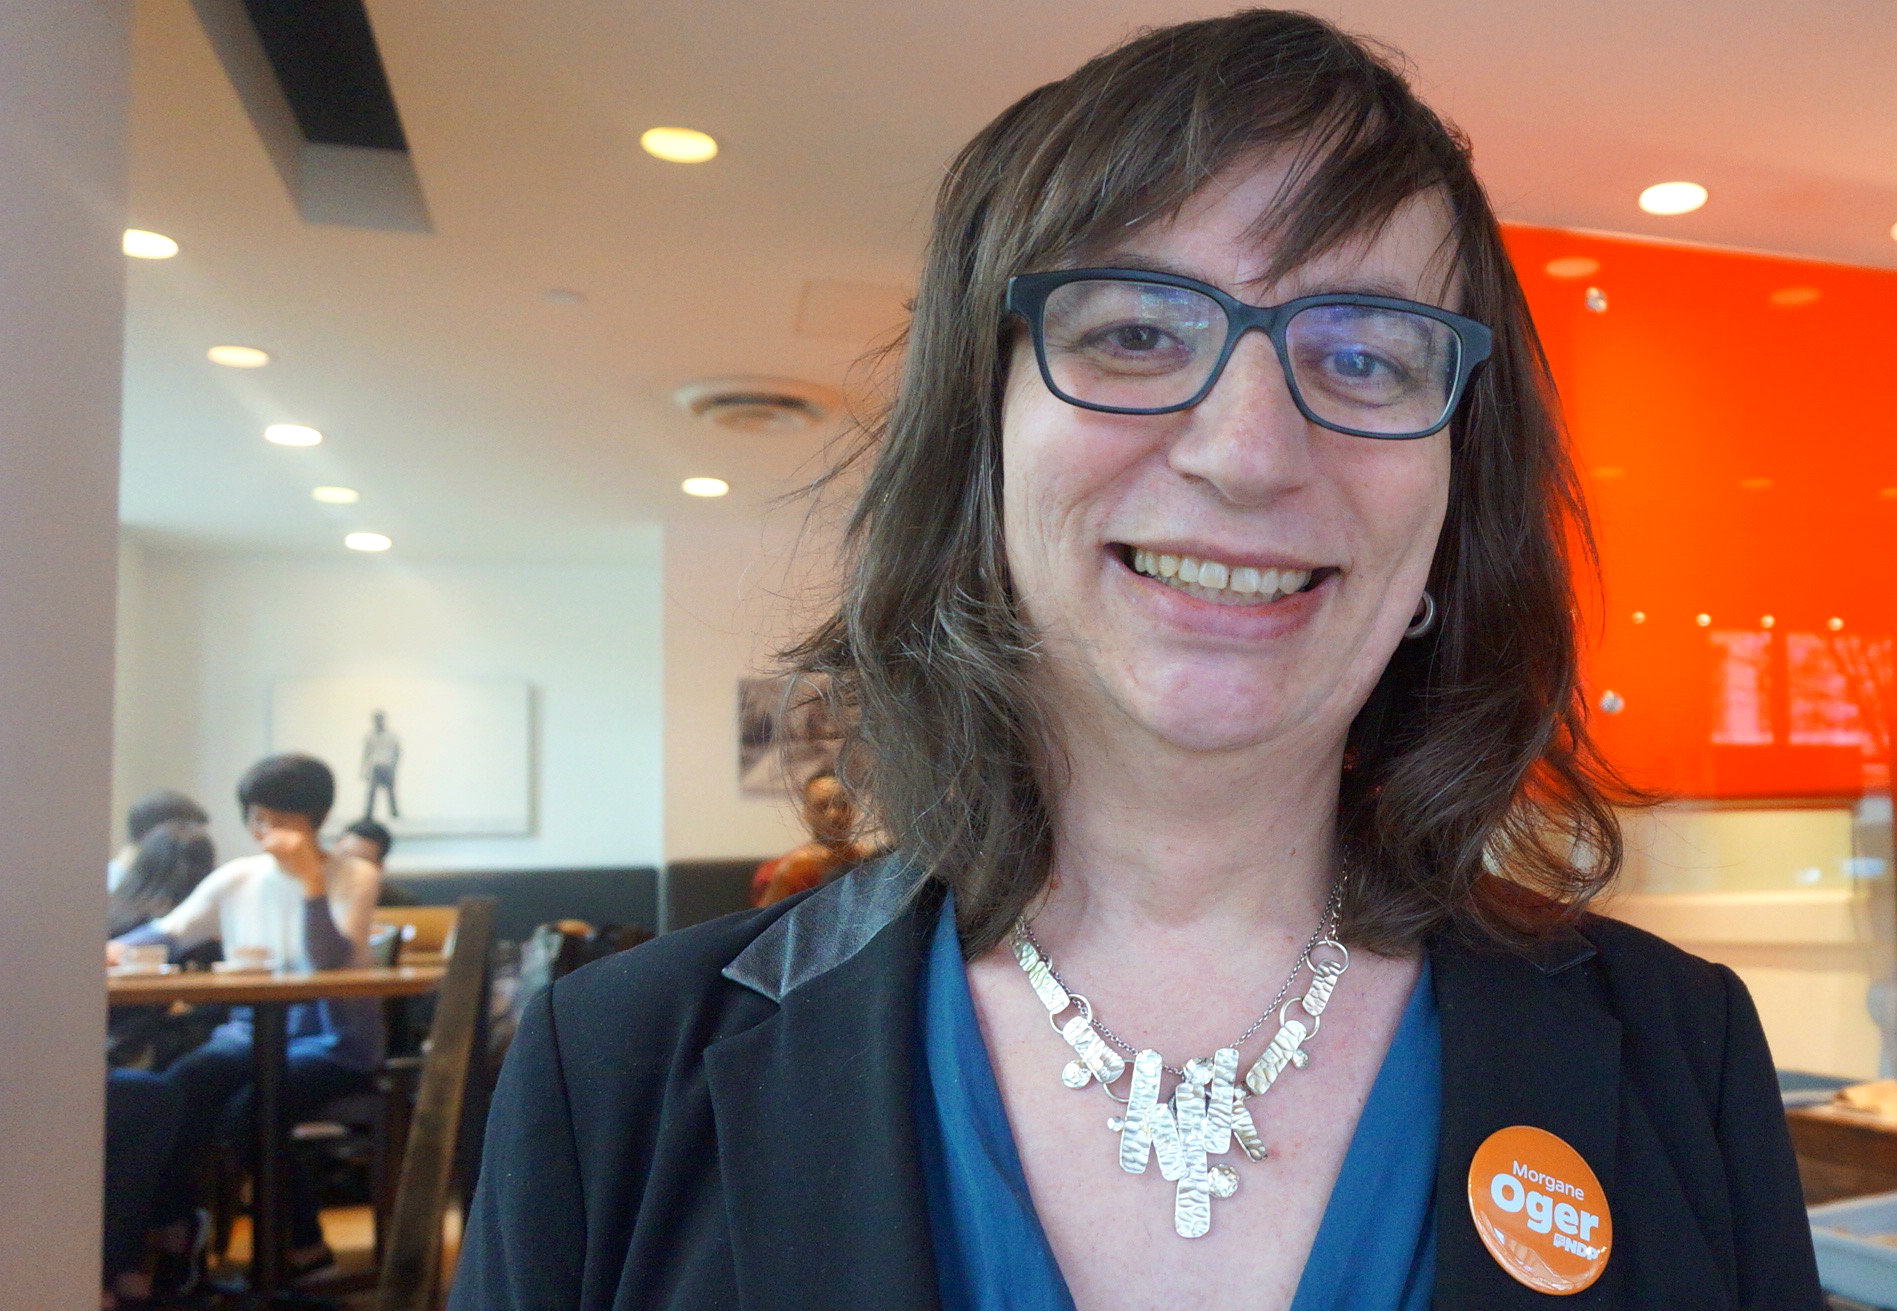 BC NDP's Oger on public education, and why she traded male